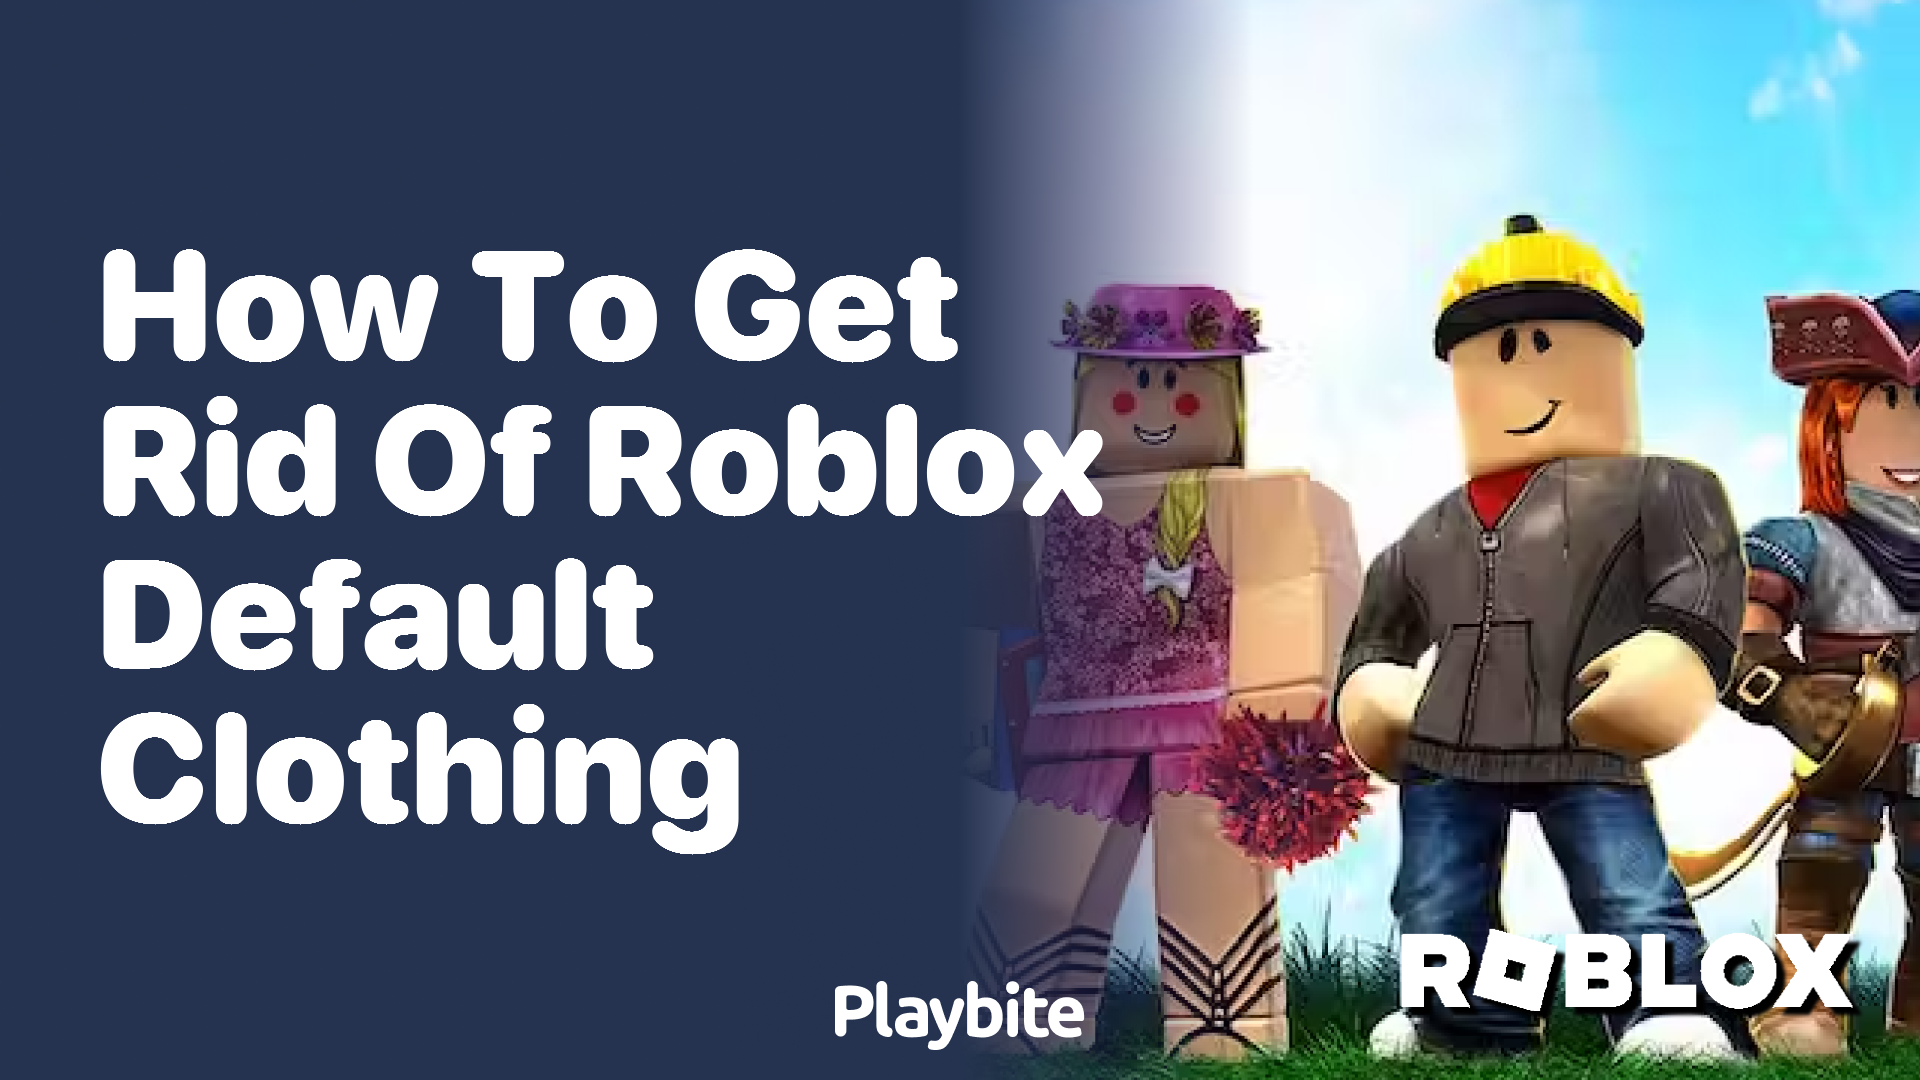 How to Get Rid of Roblox Default Clothing